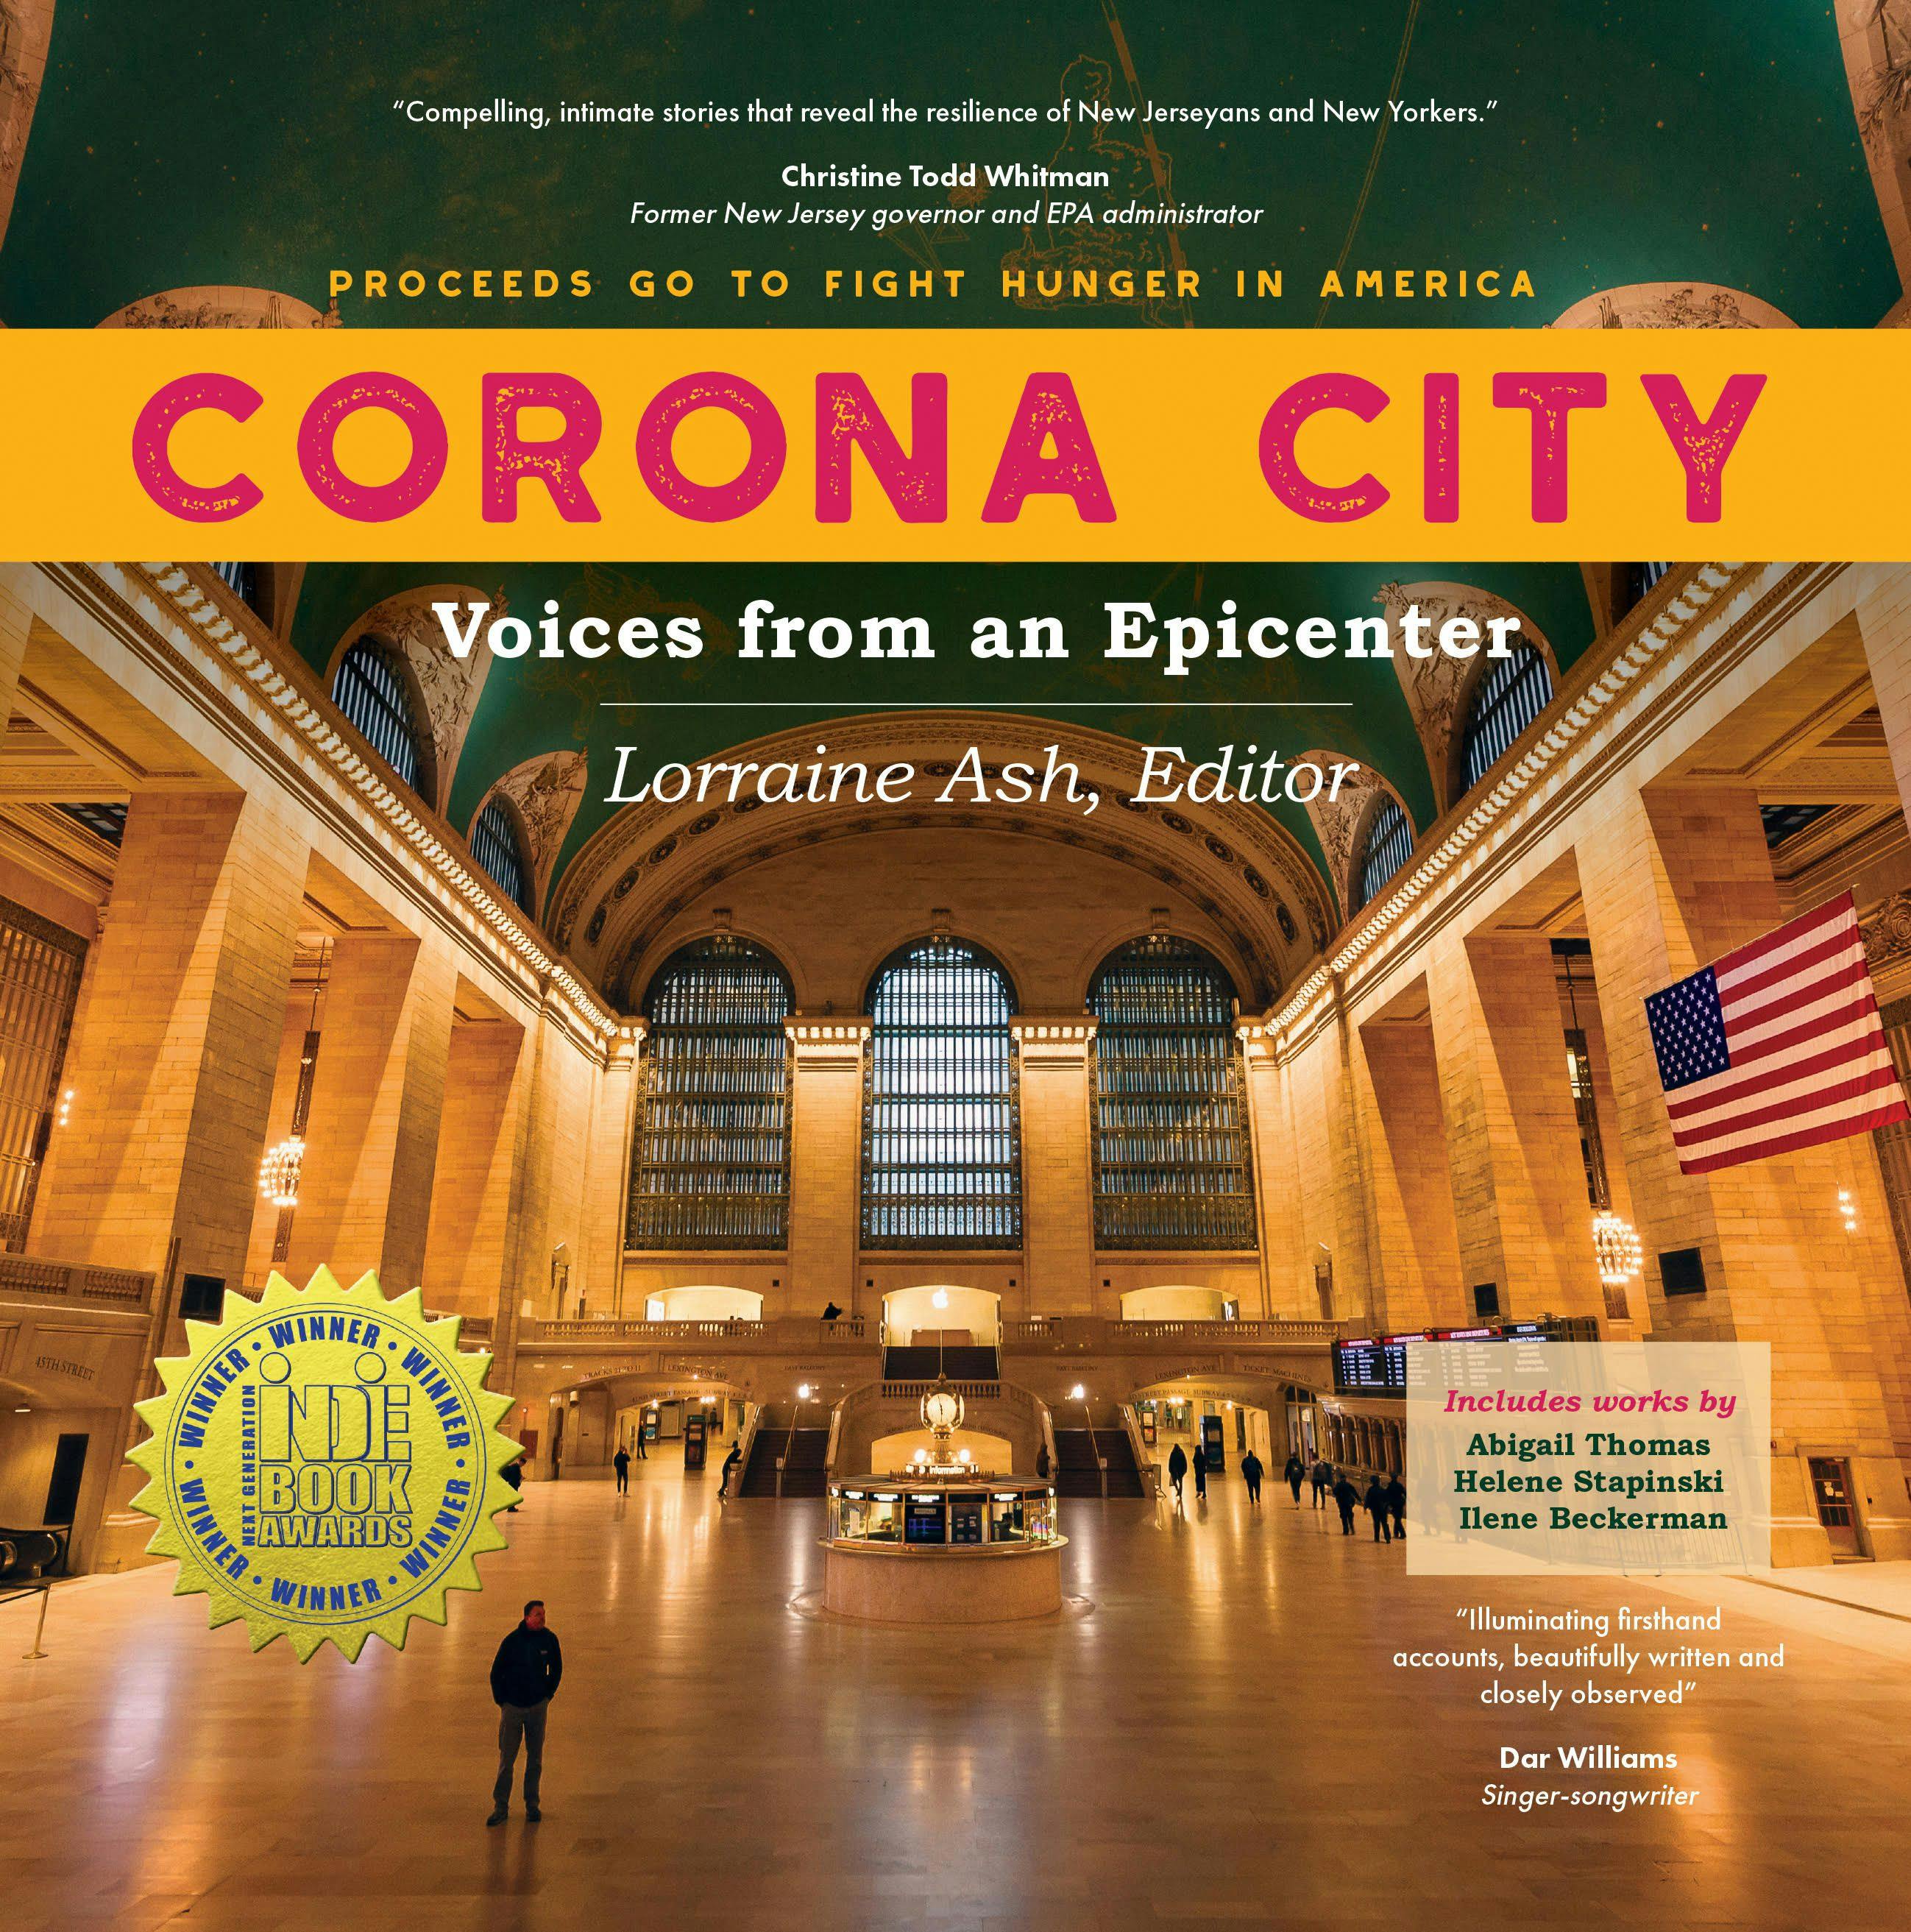 Corona City: Voices from an Epicenter, Lorraine Ash, Editor  (Original photo "Rush Hour" by Matthijs Noome)